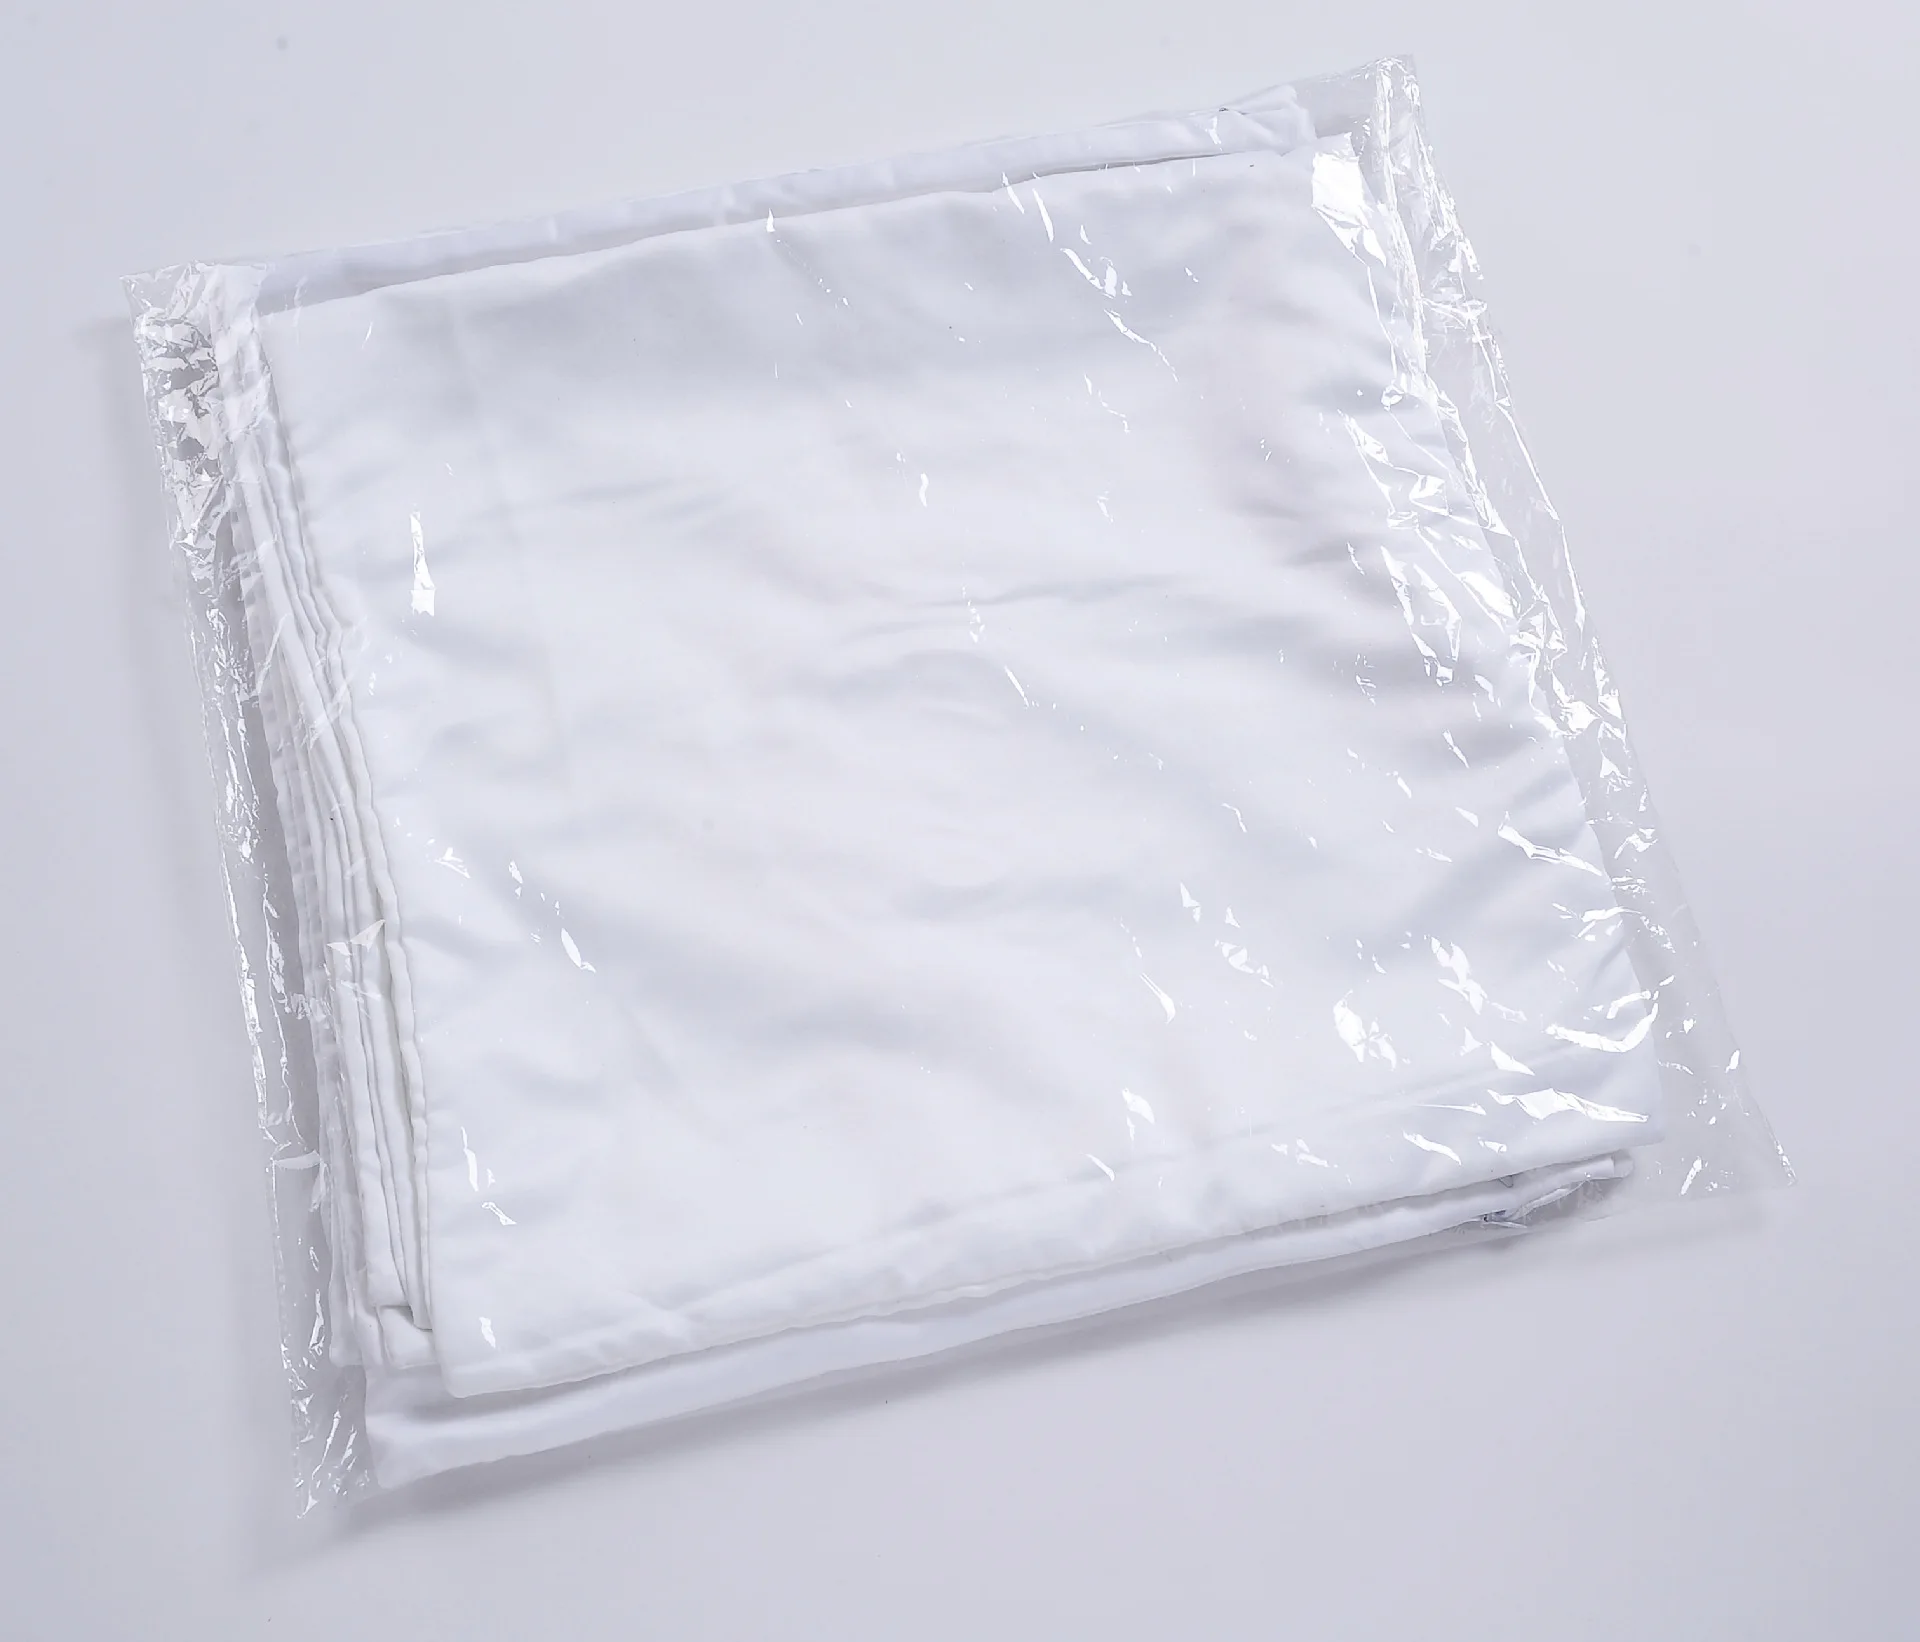 FREE SHIPPING 10pcs/lot 40x40cm Sublimation Blank pillowcase Polyester Peach Skin for Sublimation Transfer Printing DIY Gift free shipping 10pcs lot sublimation blank usb flash drive keychain ​gifts heat transfer printing diy gift